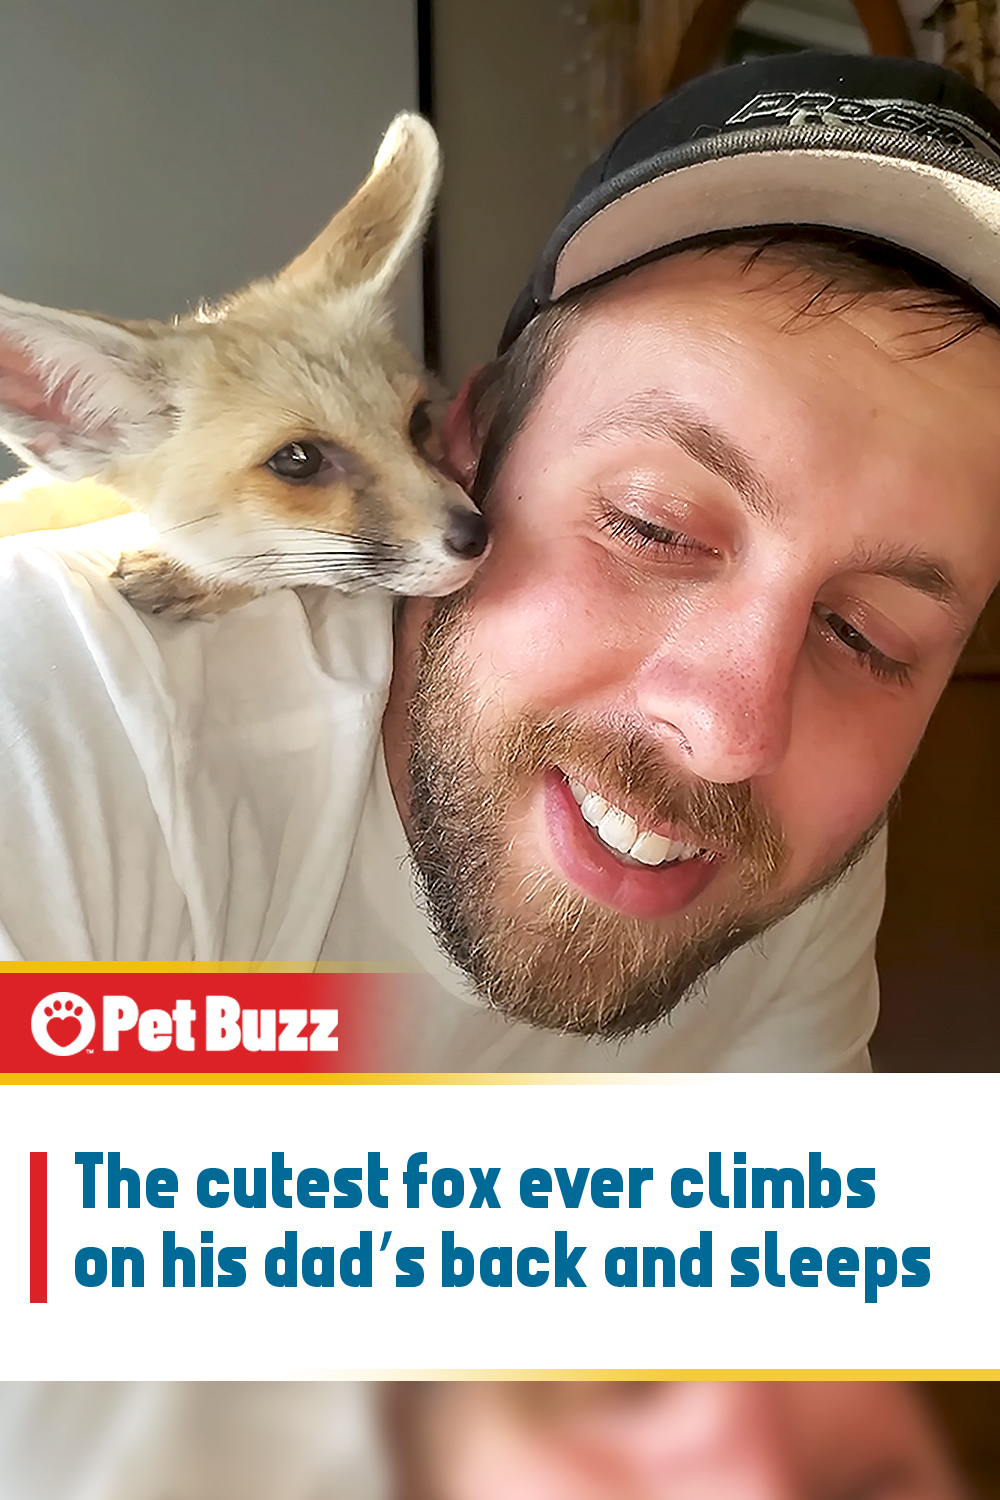 The cutest fox ever climbs on his dad’s back and sleeps